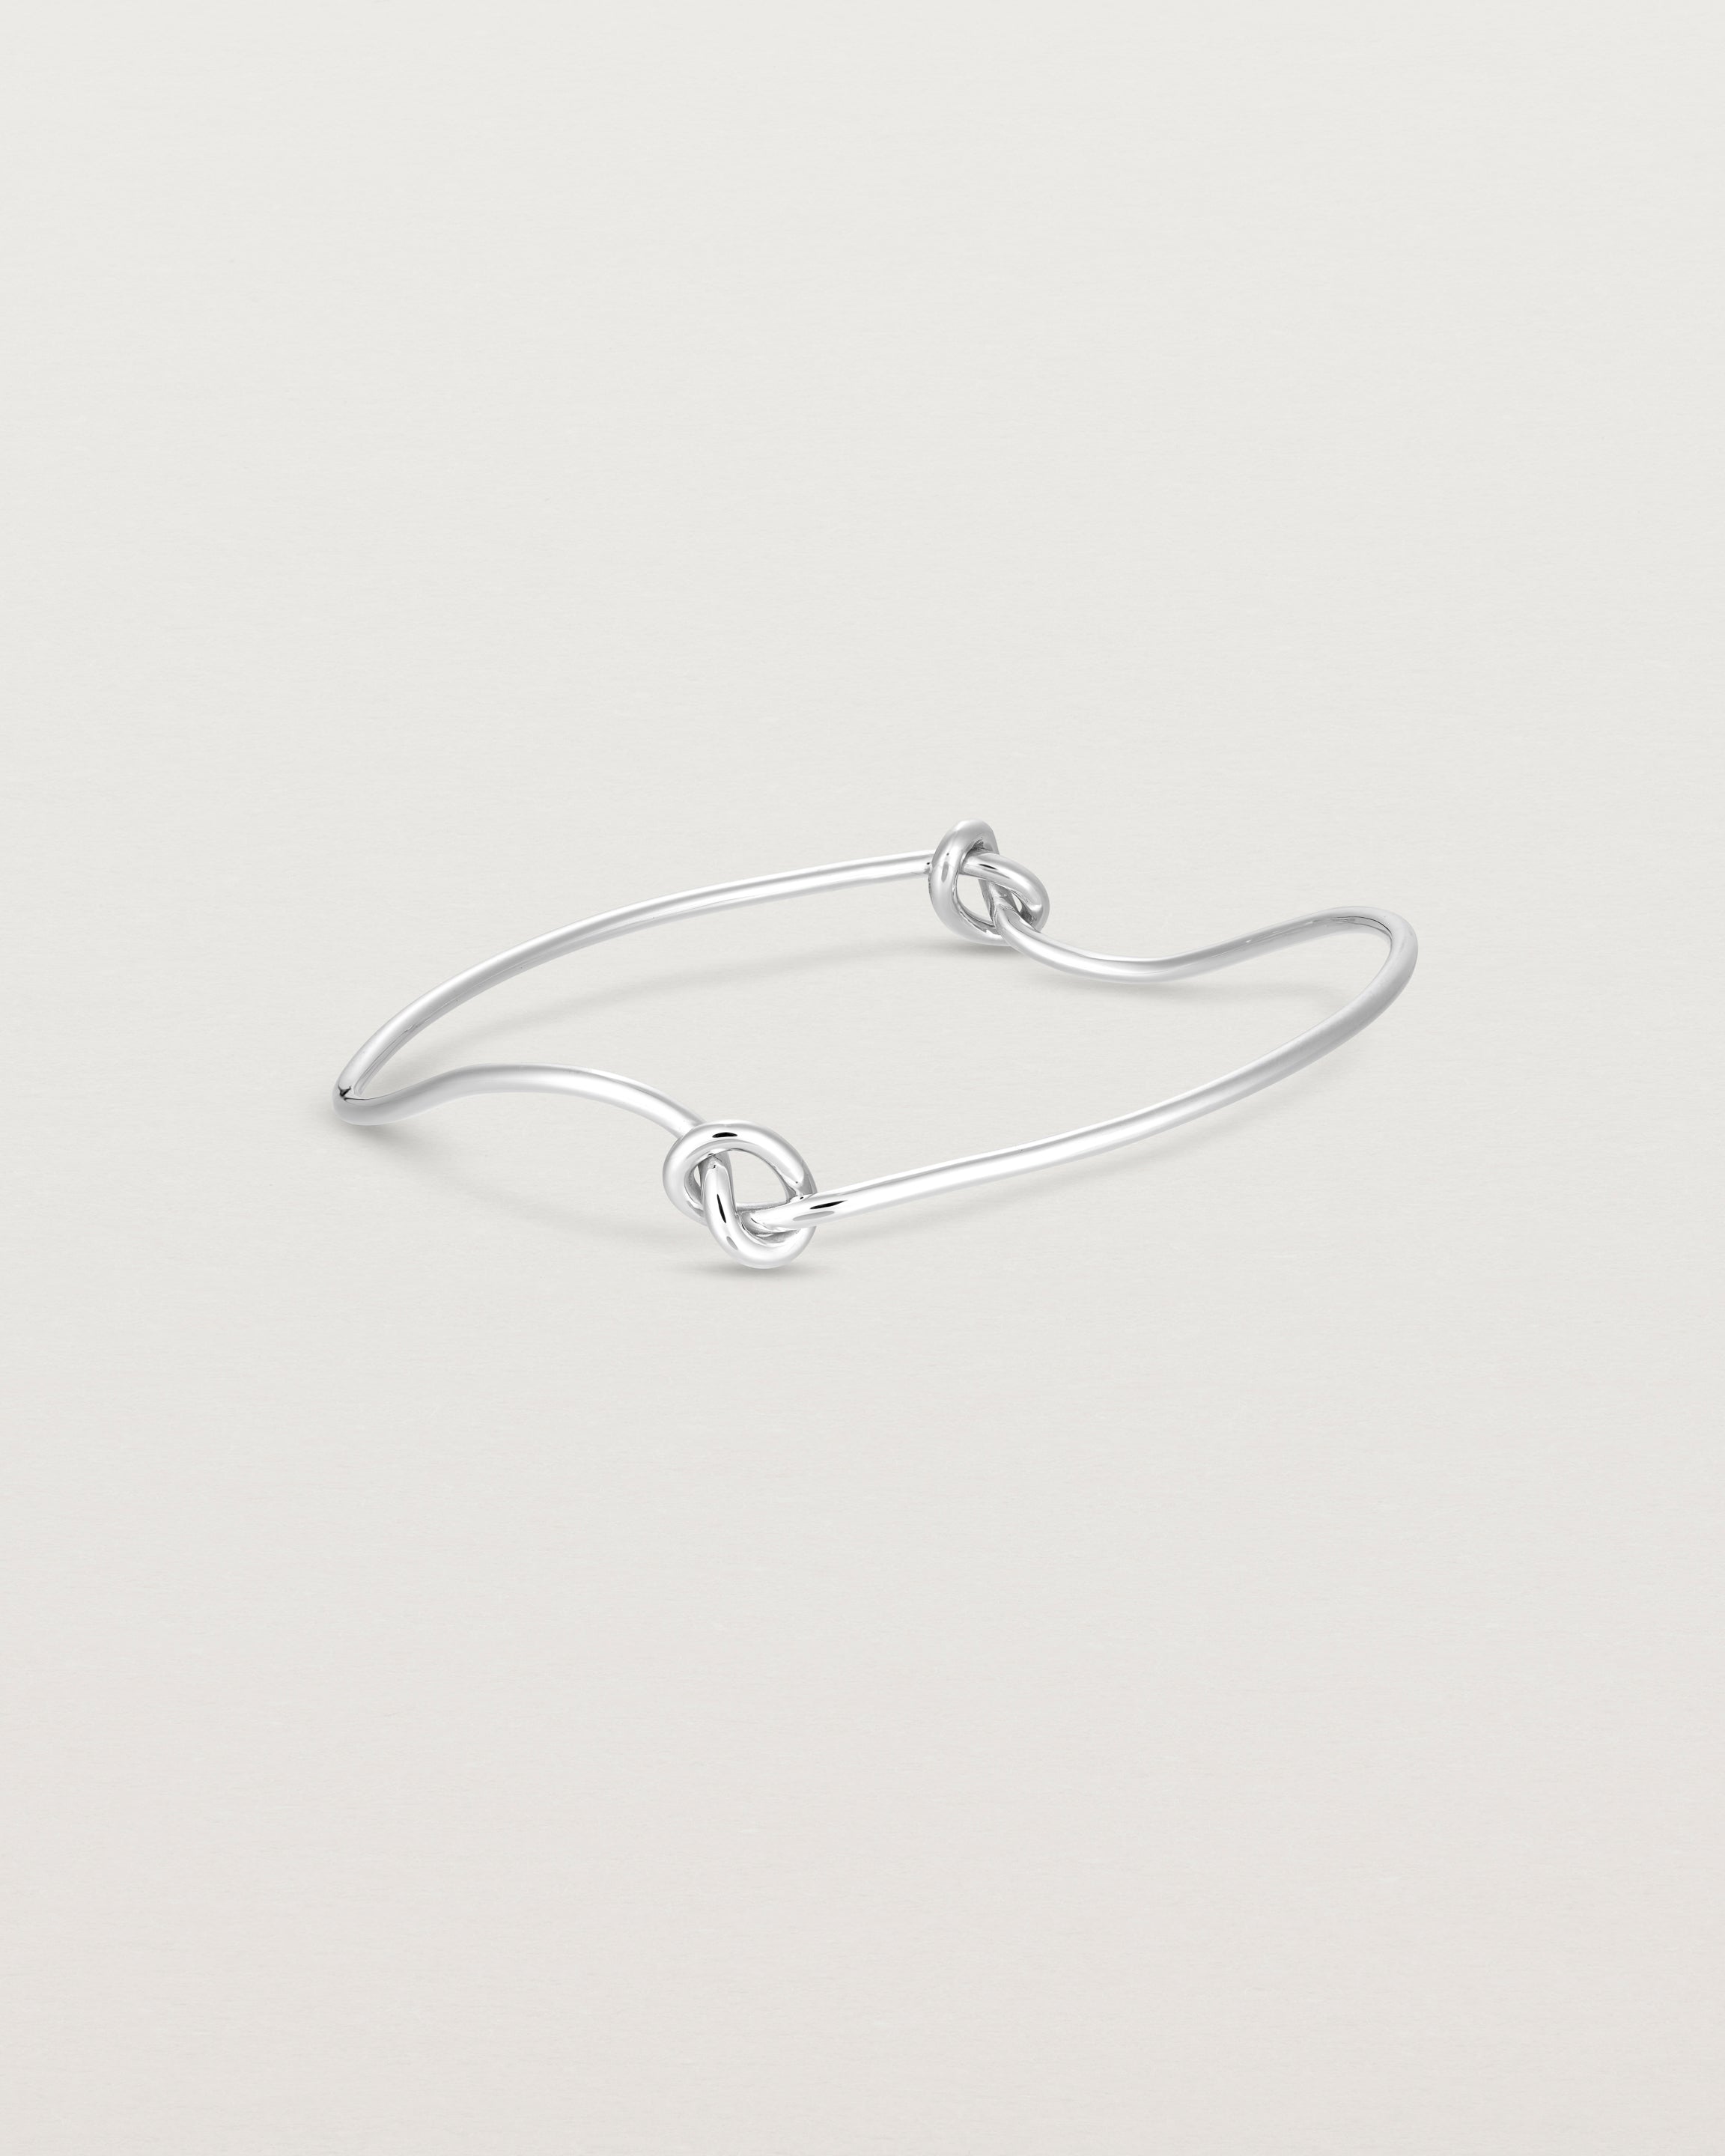 Front view of the Dà anam Bangle in sterling silver.